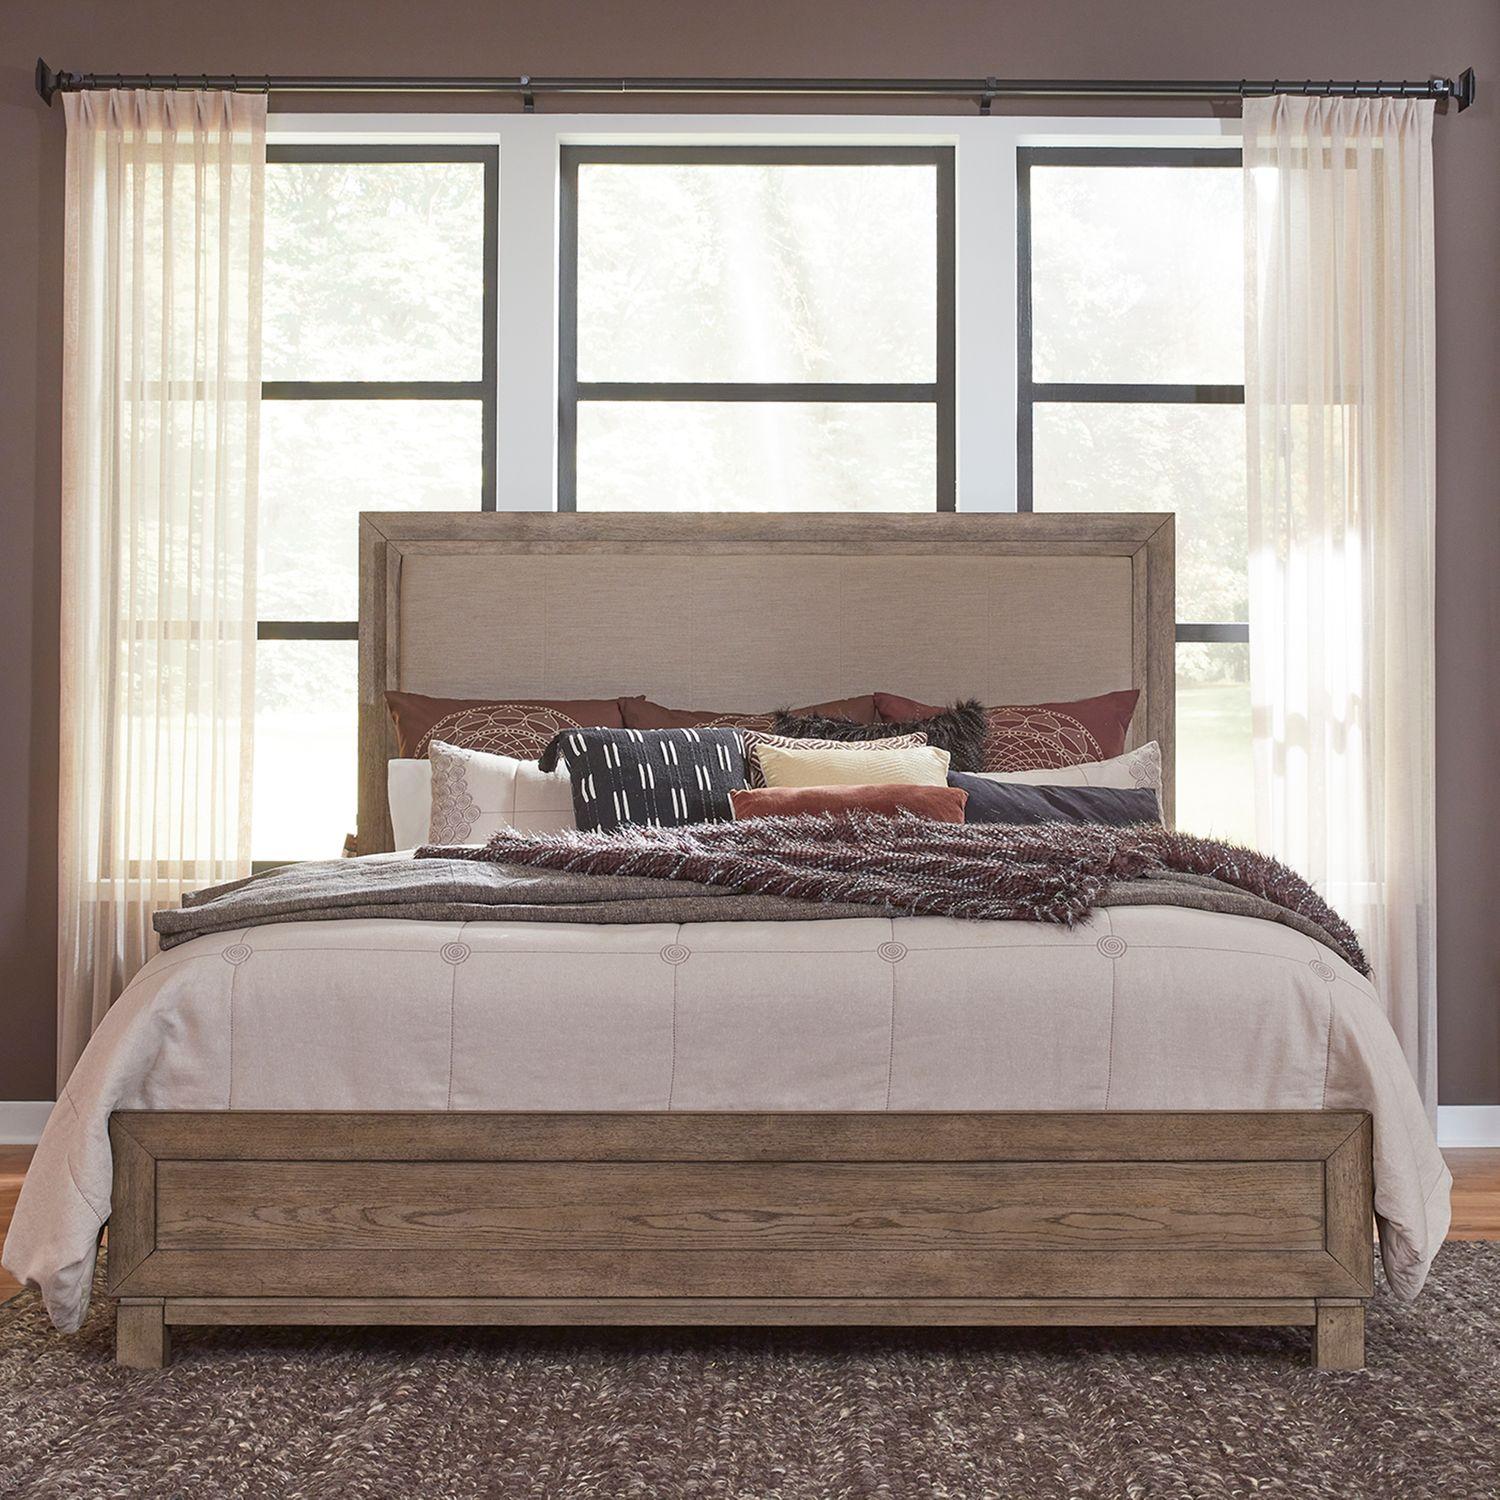 Classic Platform Bed Canyon Road (876-BR) 876-BR-CKUB in Brown Linen